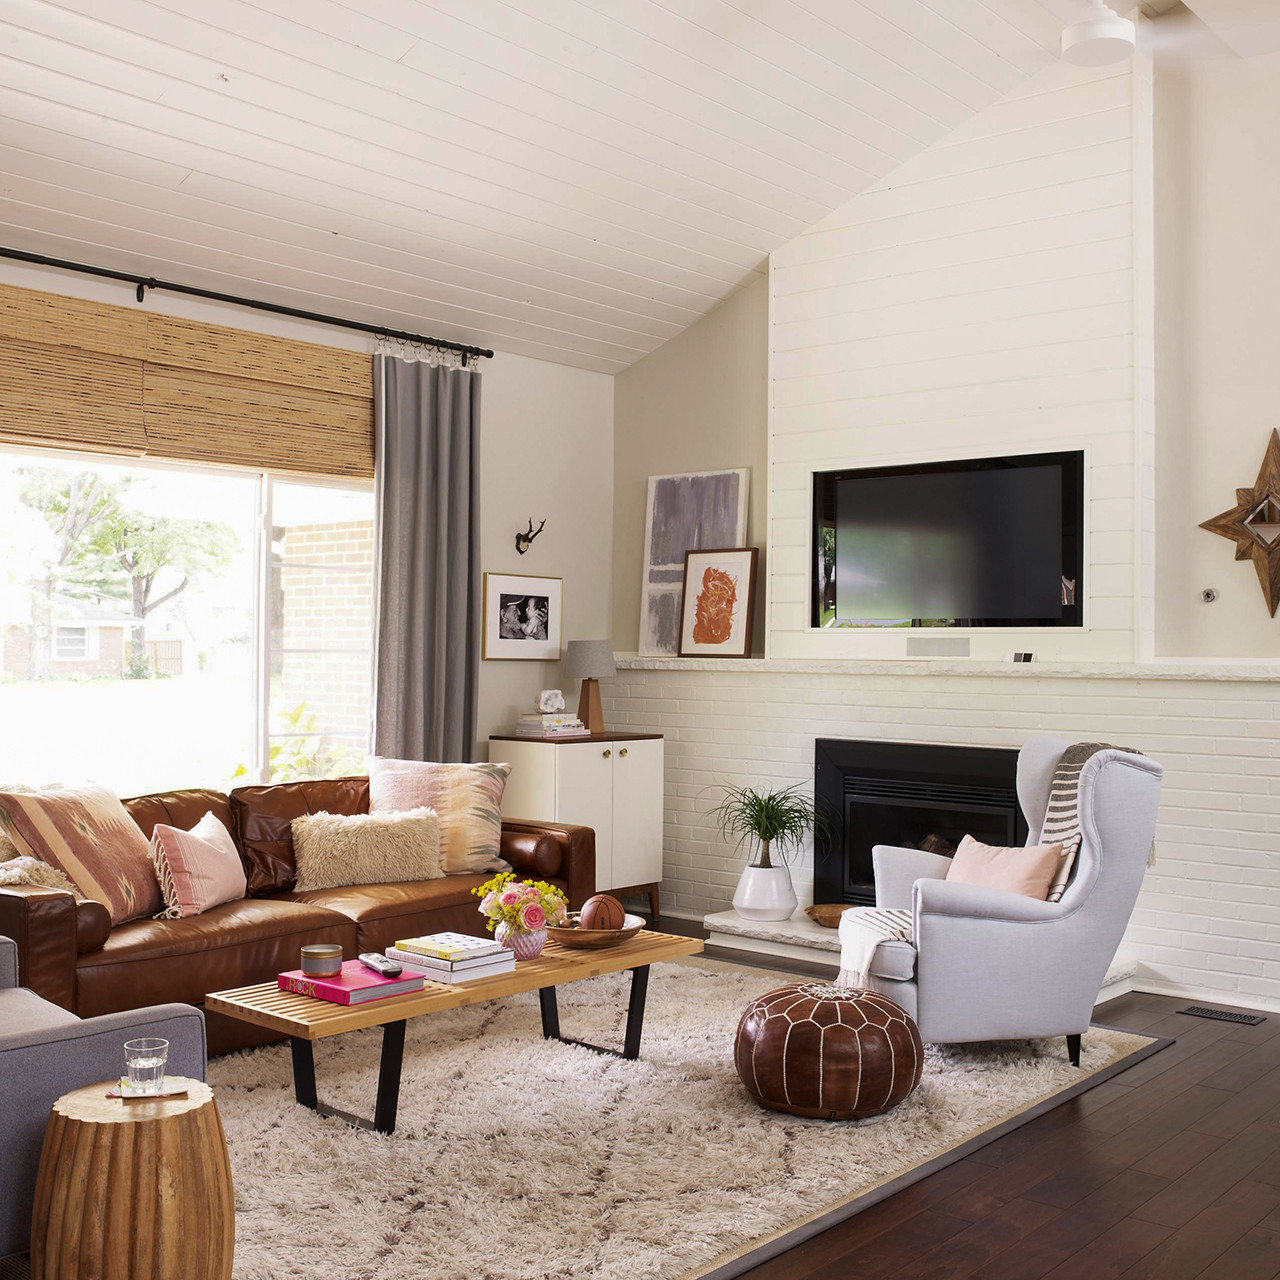 Brown Sectional Living Room Ideas
 Our Favorite Ways to Decorate with a Brown Sofa